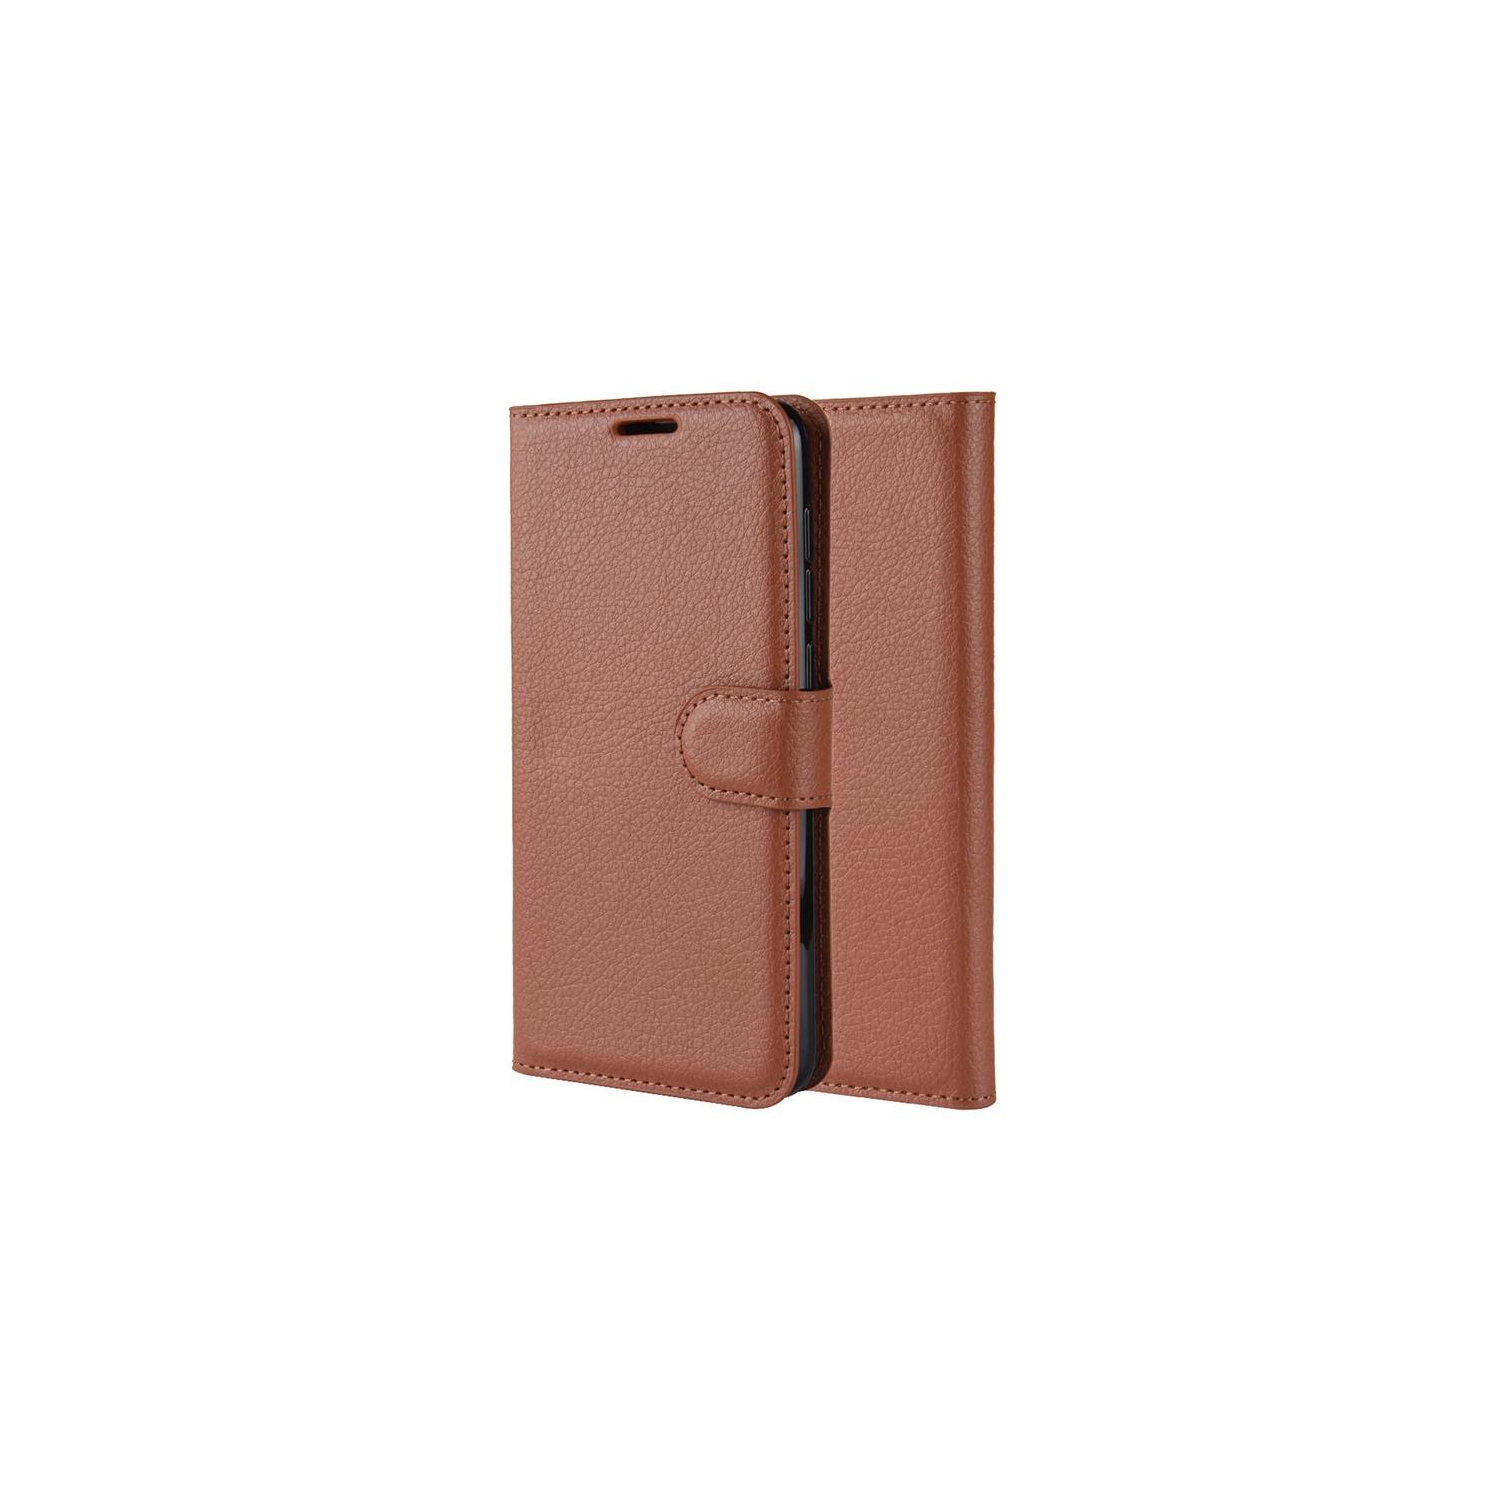 PANDACO Brown Leather Wallet Case for Samsung Galaxy S10e